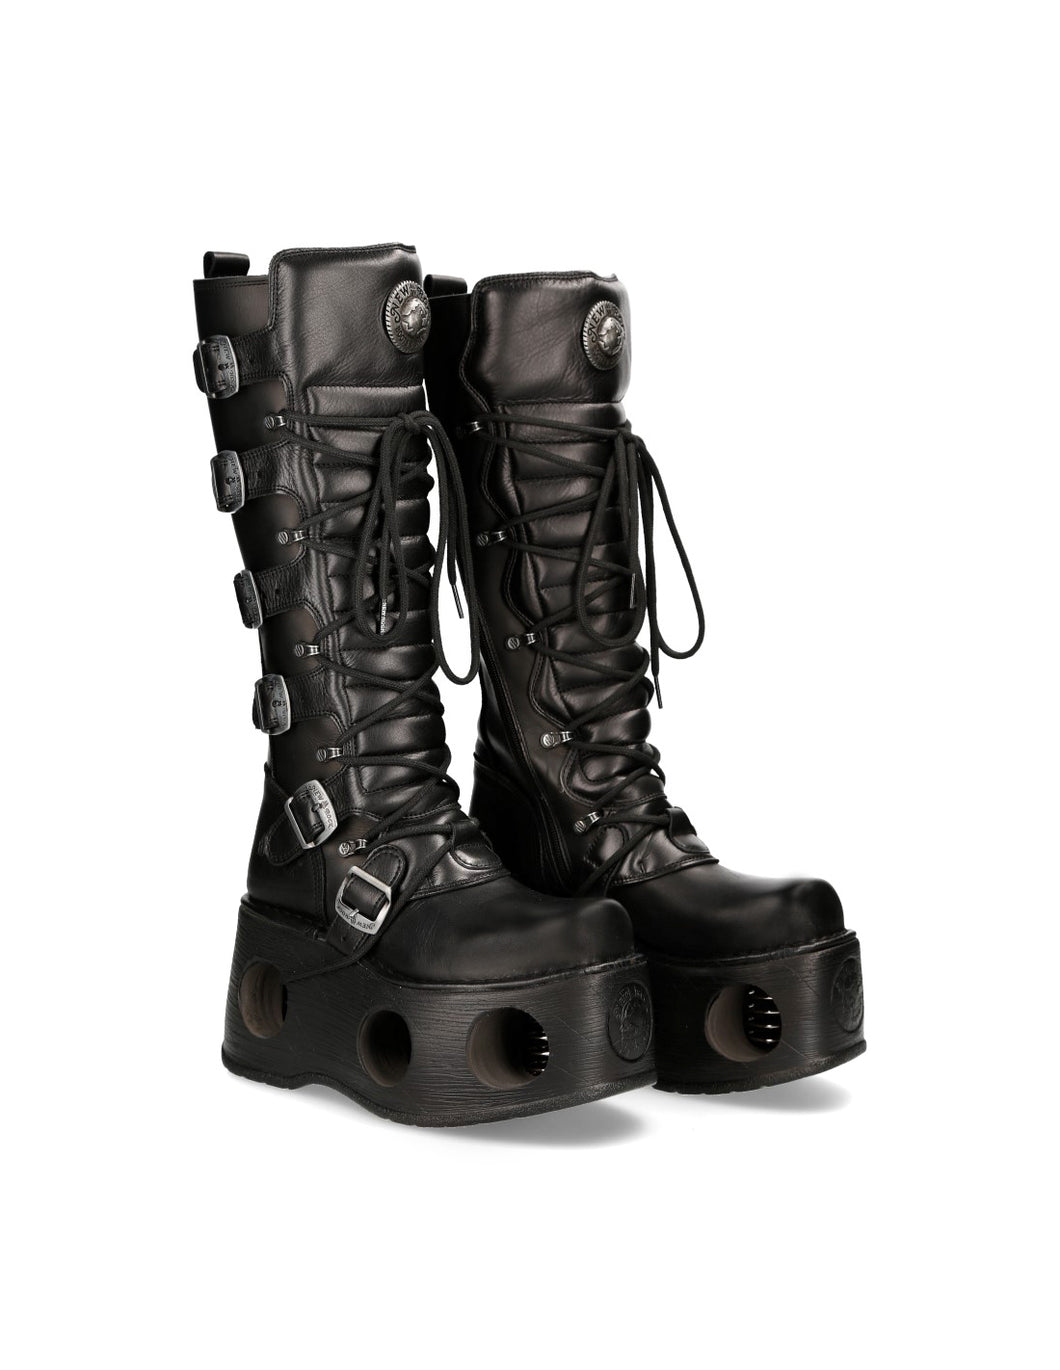 New Rock Shoes High Boots M-272-S2 Boots Gothic genuine leather with spring